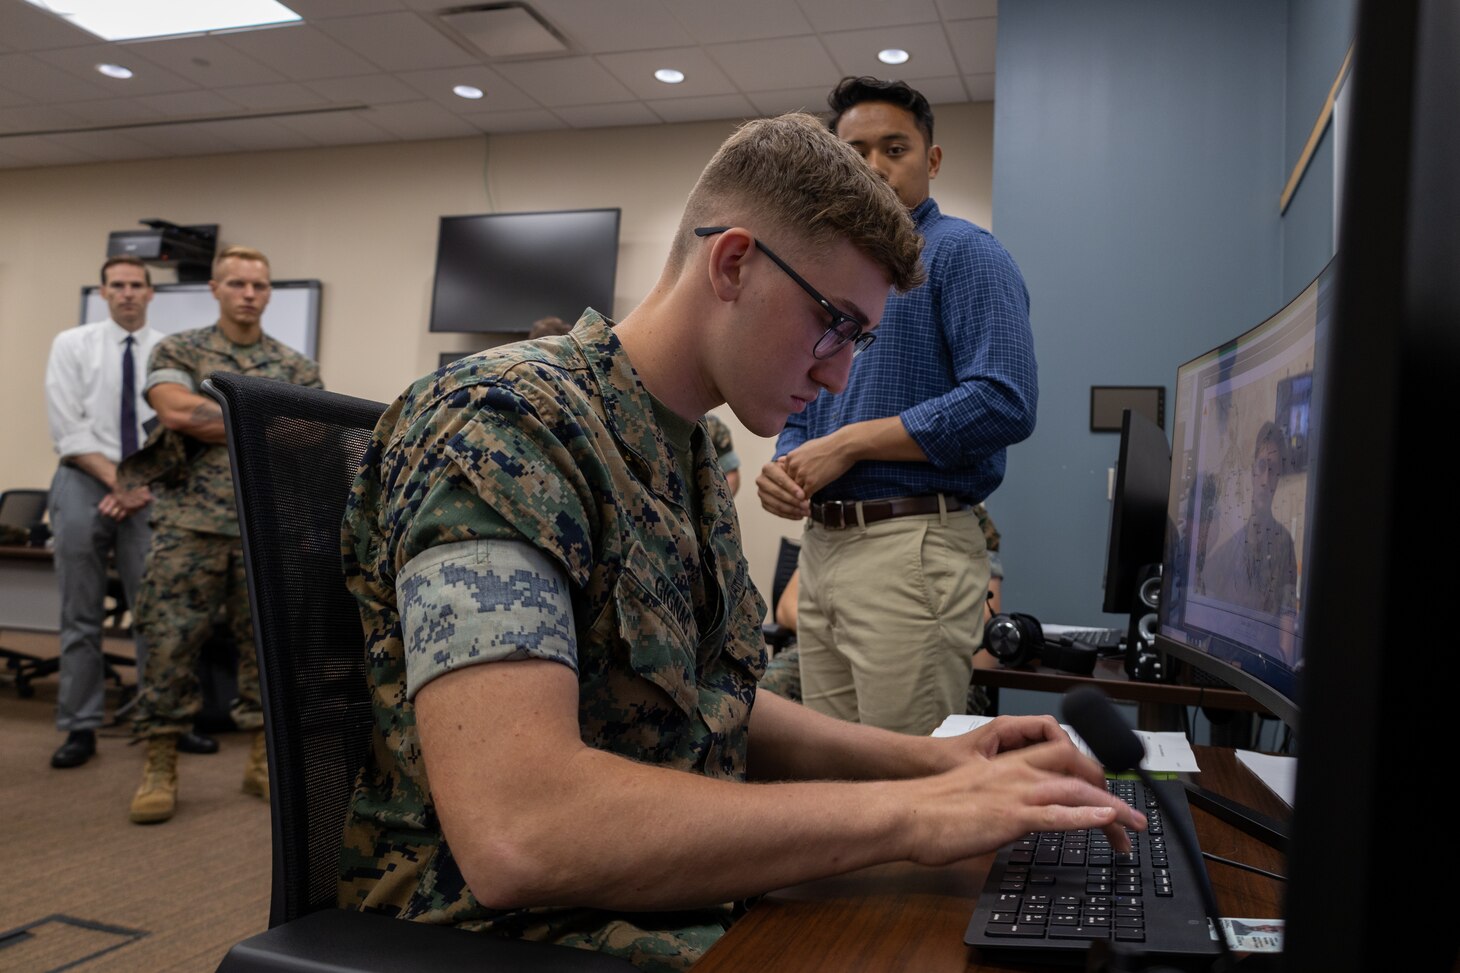 U.S. Marine Corps Lance Cpl. Matthew R. Gignac, an air-support operations operator with Marine Air Support Squadron  1, operates a prototype of the Gaming Environment for Air Readiness at Marine Corps Air Station Cherry Point, North Carolina, July 28, 2022. The GEAR is an artificial-intelligence enabled and role-based simulation designed to train and develop MASS-1 Marines by exposing them to interactive scenarios prior to participating in an exercise or deployment. MASS-1 is a subordinate unit of 2nd Marine Aircraft Wing, the aviation combat element of II Marine Expeditionary Force.